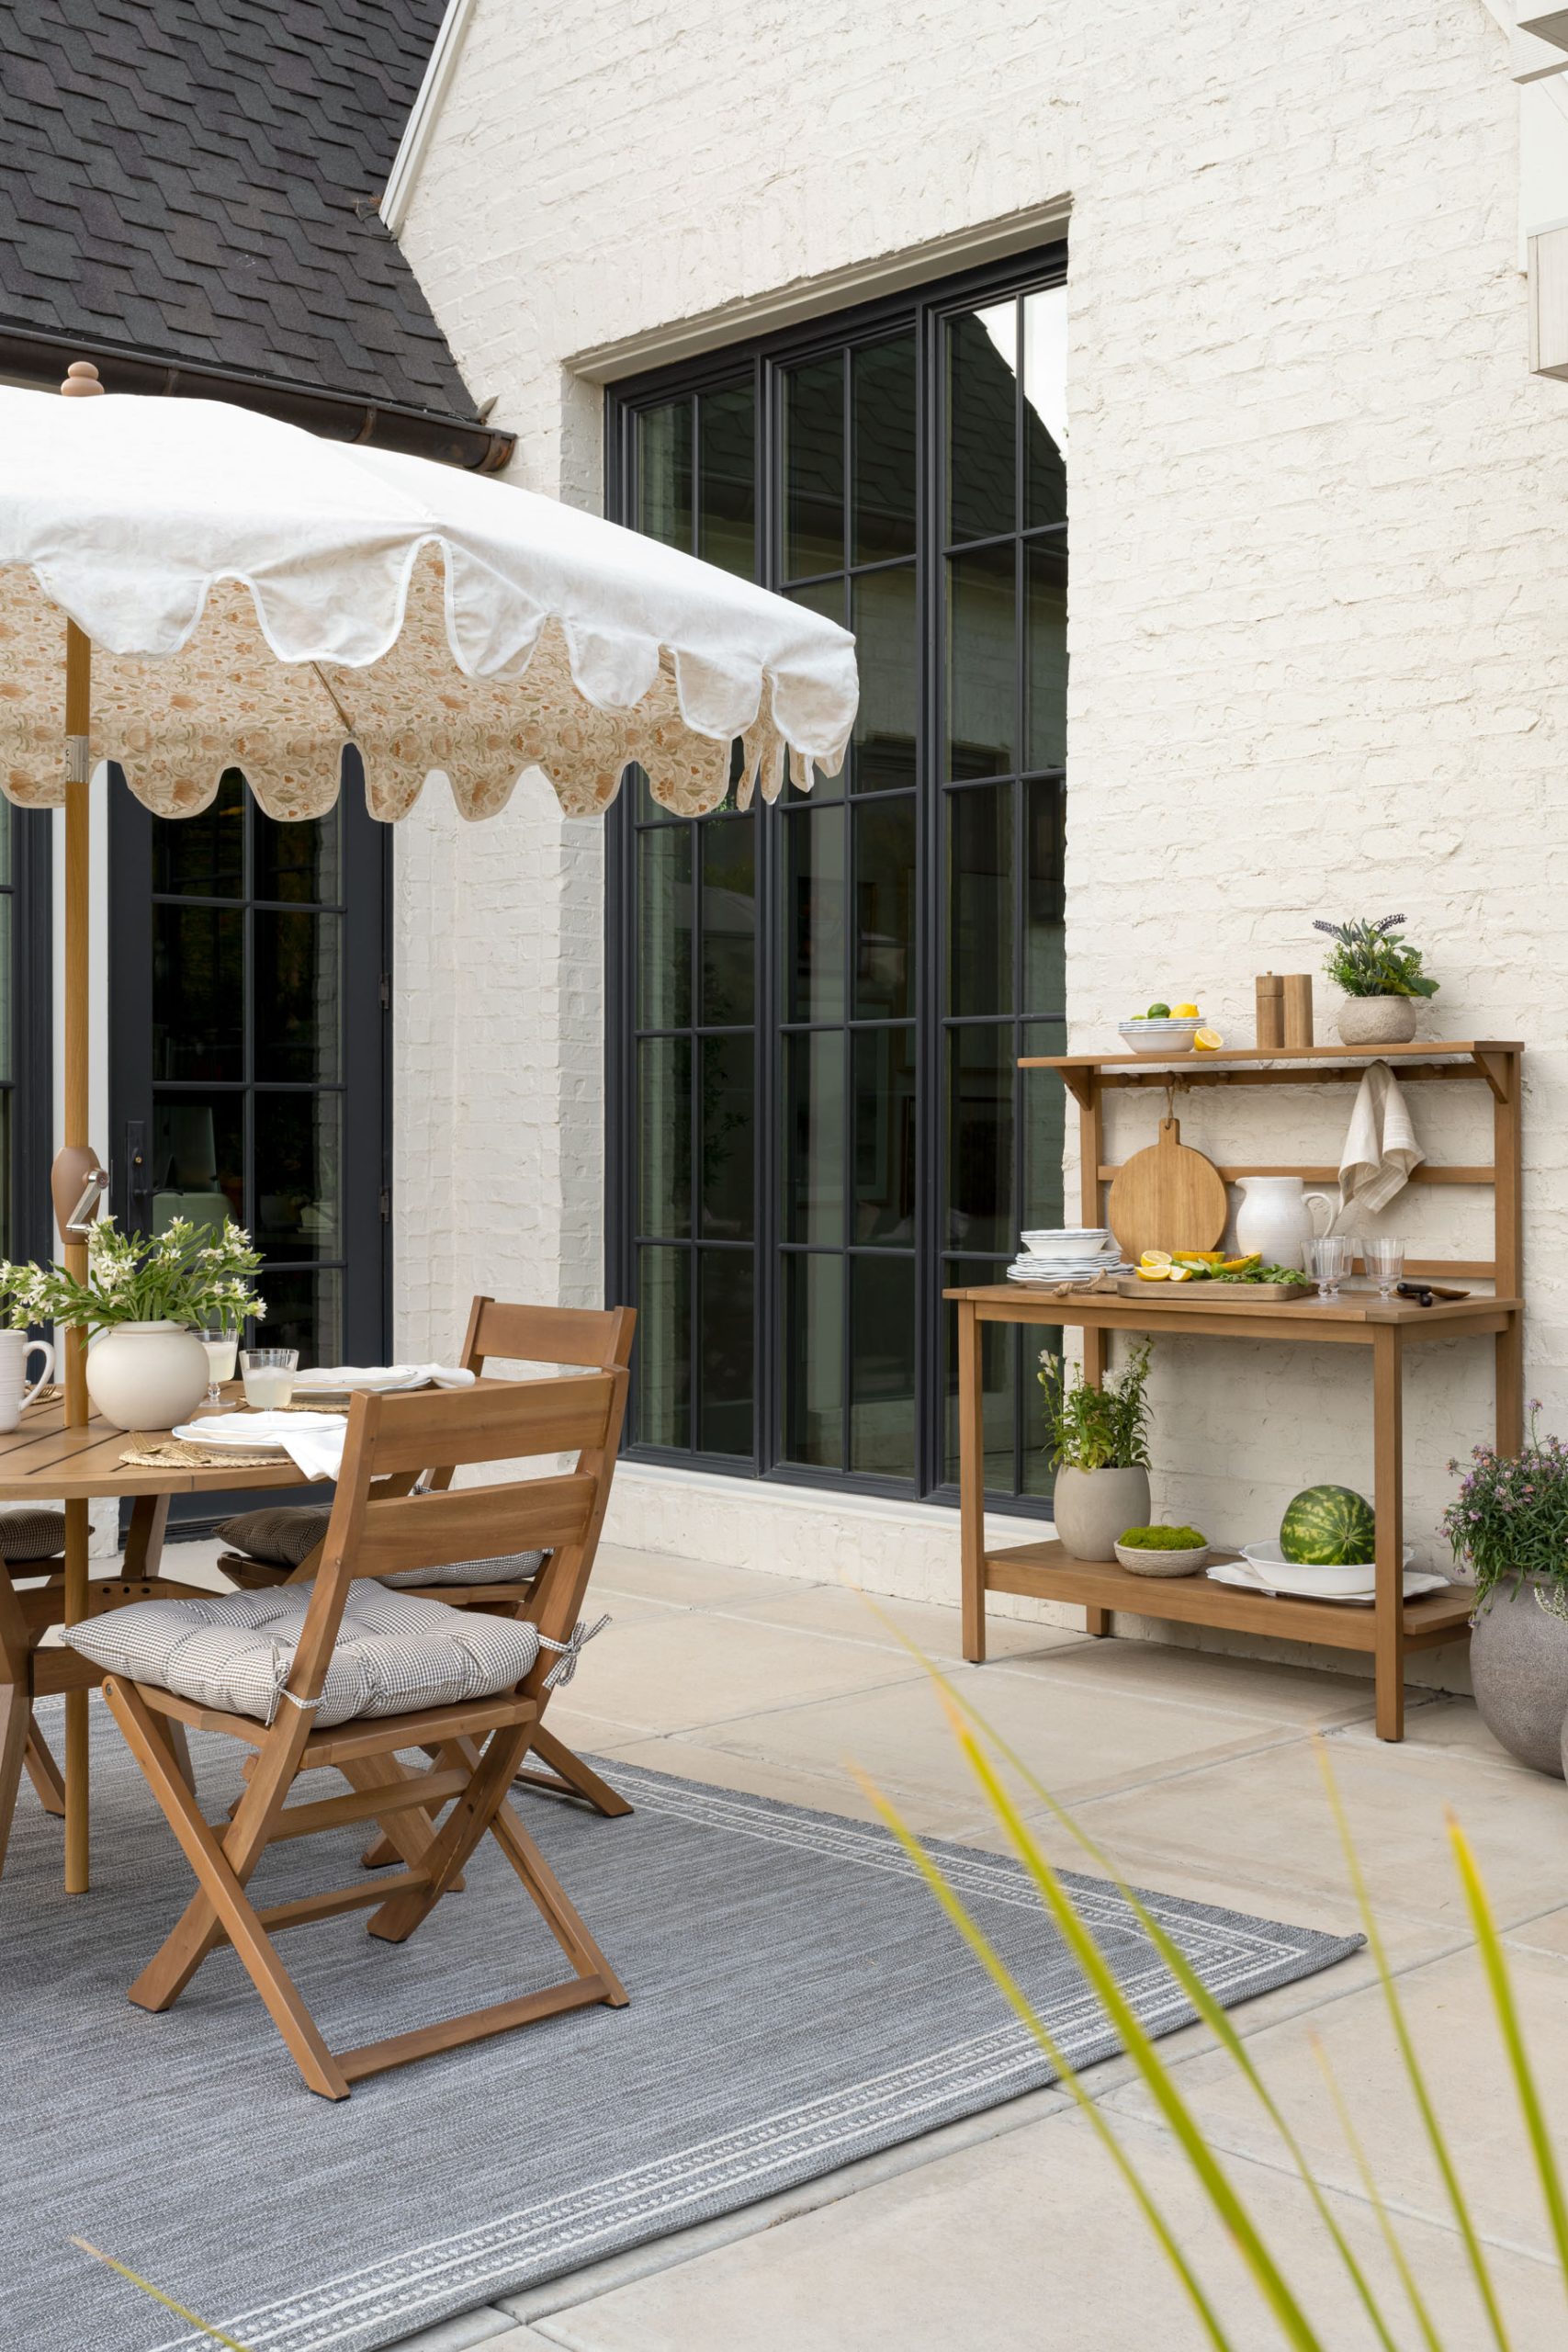 Outdoor dining area with umbrella and wood hutch